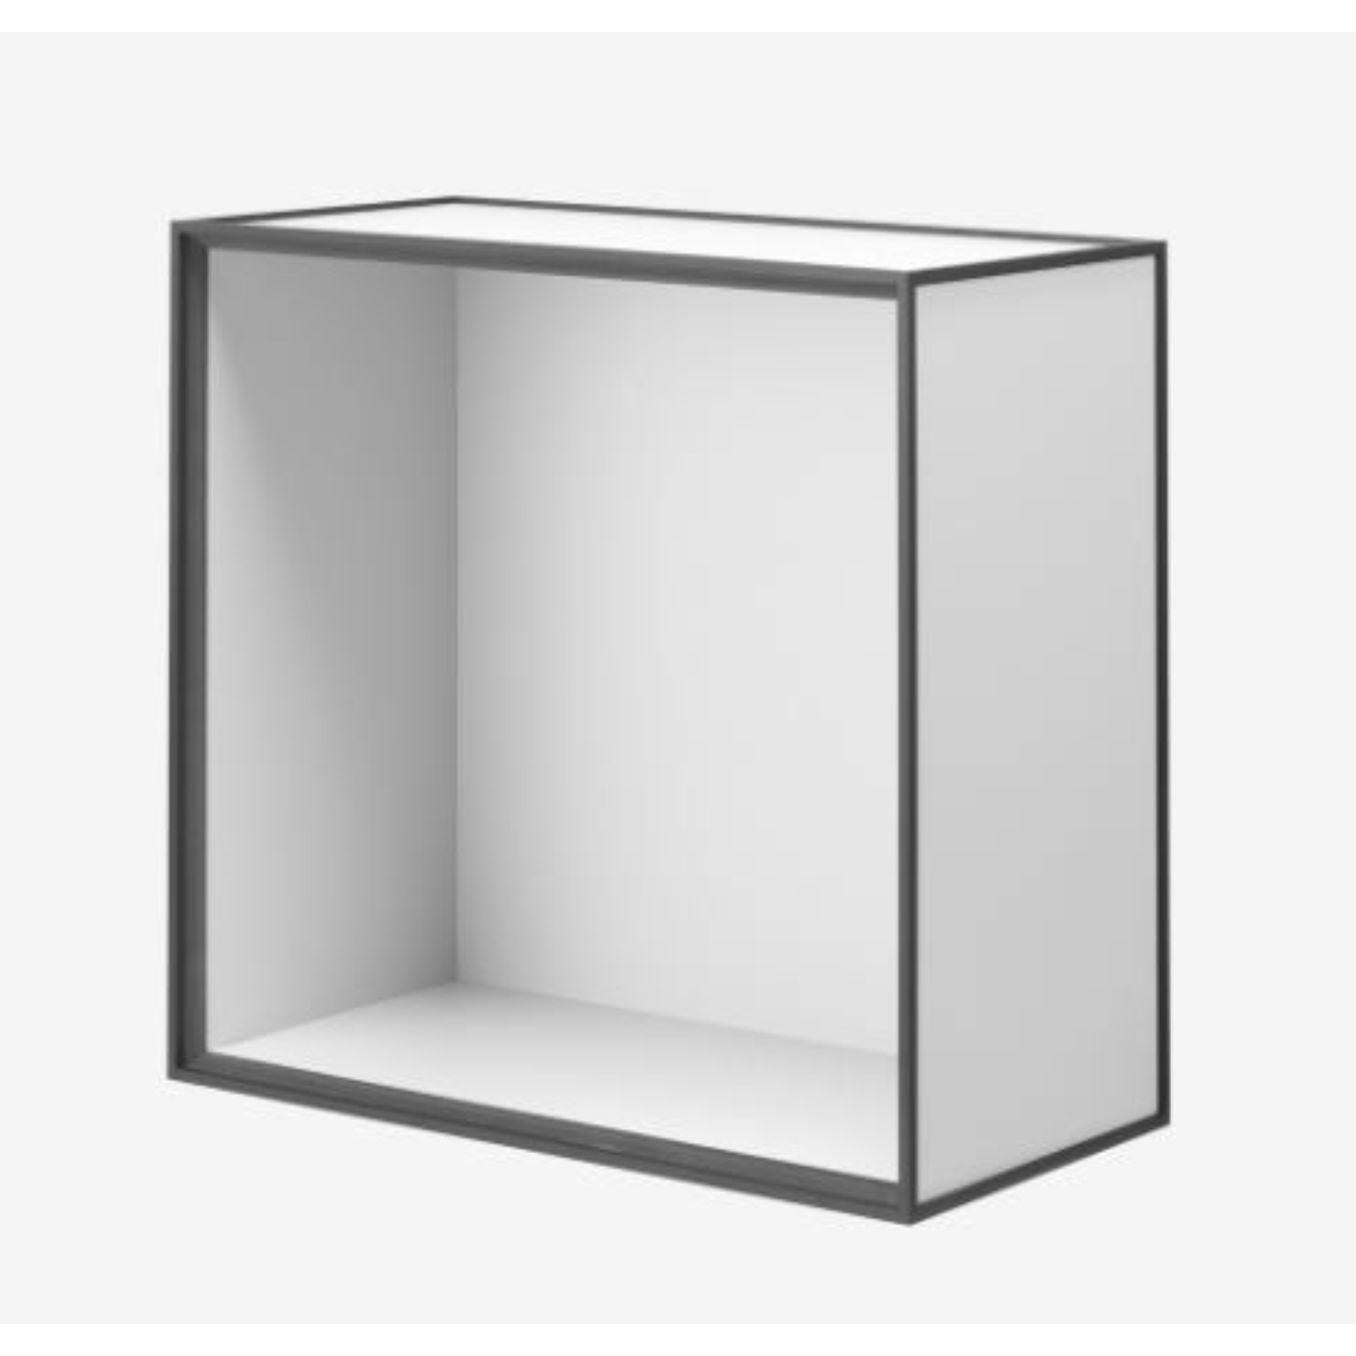 42 Light grey frame box by Lassen
Dimensions: D 42 x W 21 x H 42 cm 
Materials: finér, melamin, melamin, melamine, metal, veneer
Also available in different colours and dimensions. 
Weight: 10.5 Kg


By Lassen is a Danish design brand focused